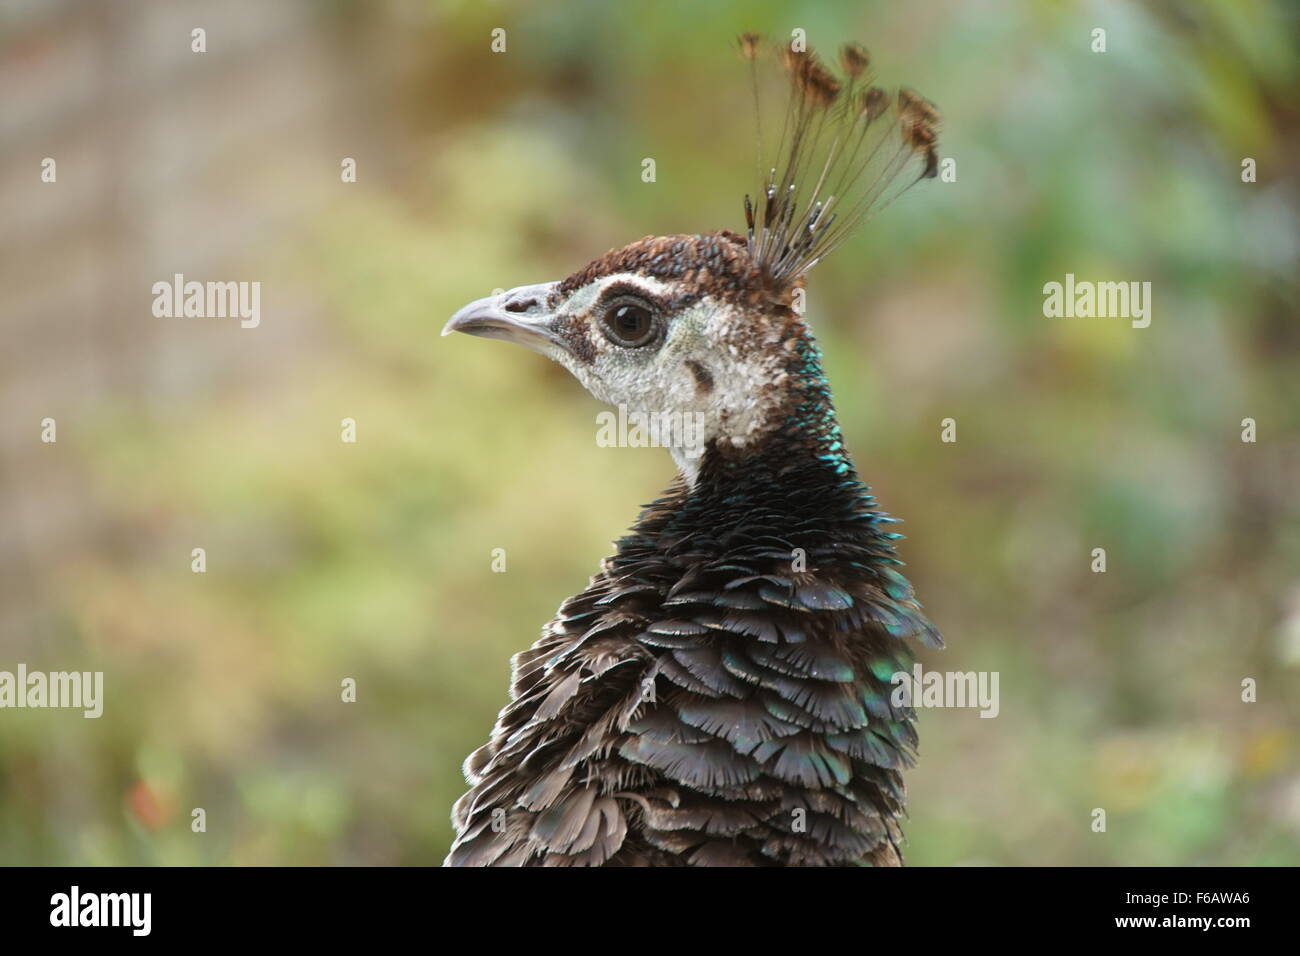 Head shot of an Indian/Blue Peahen Stock Photo